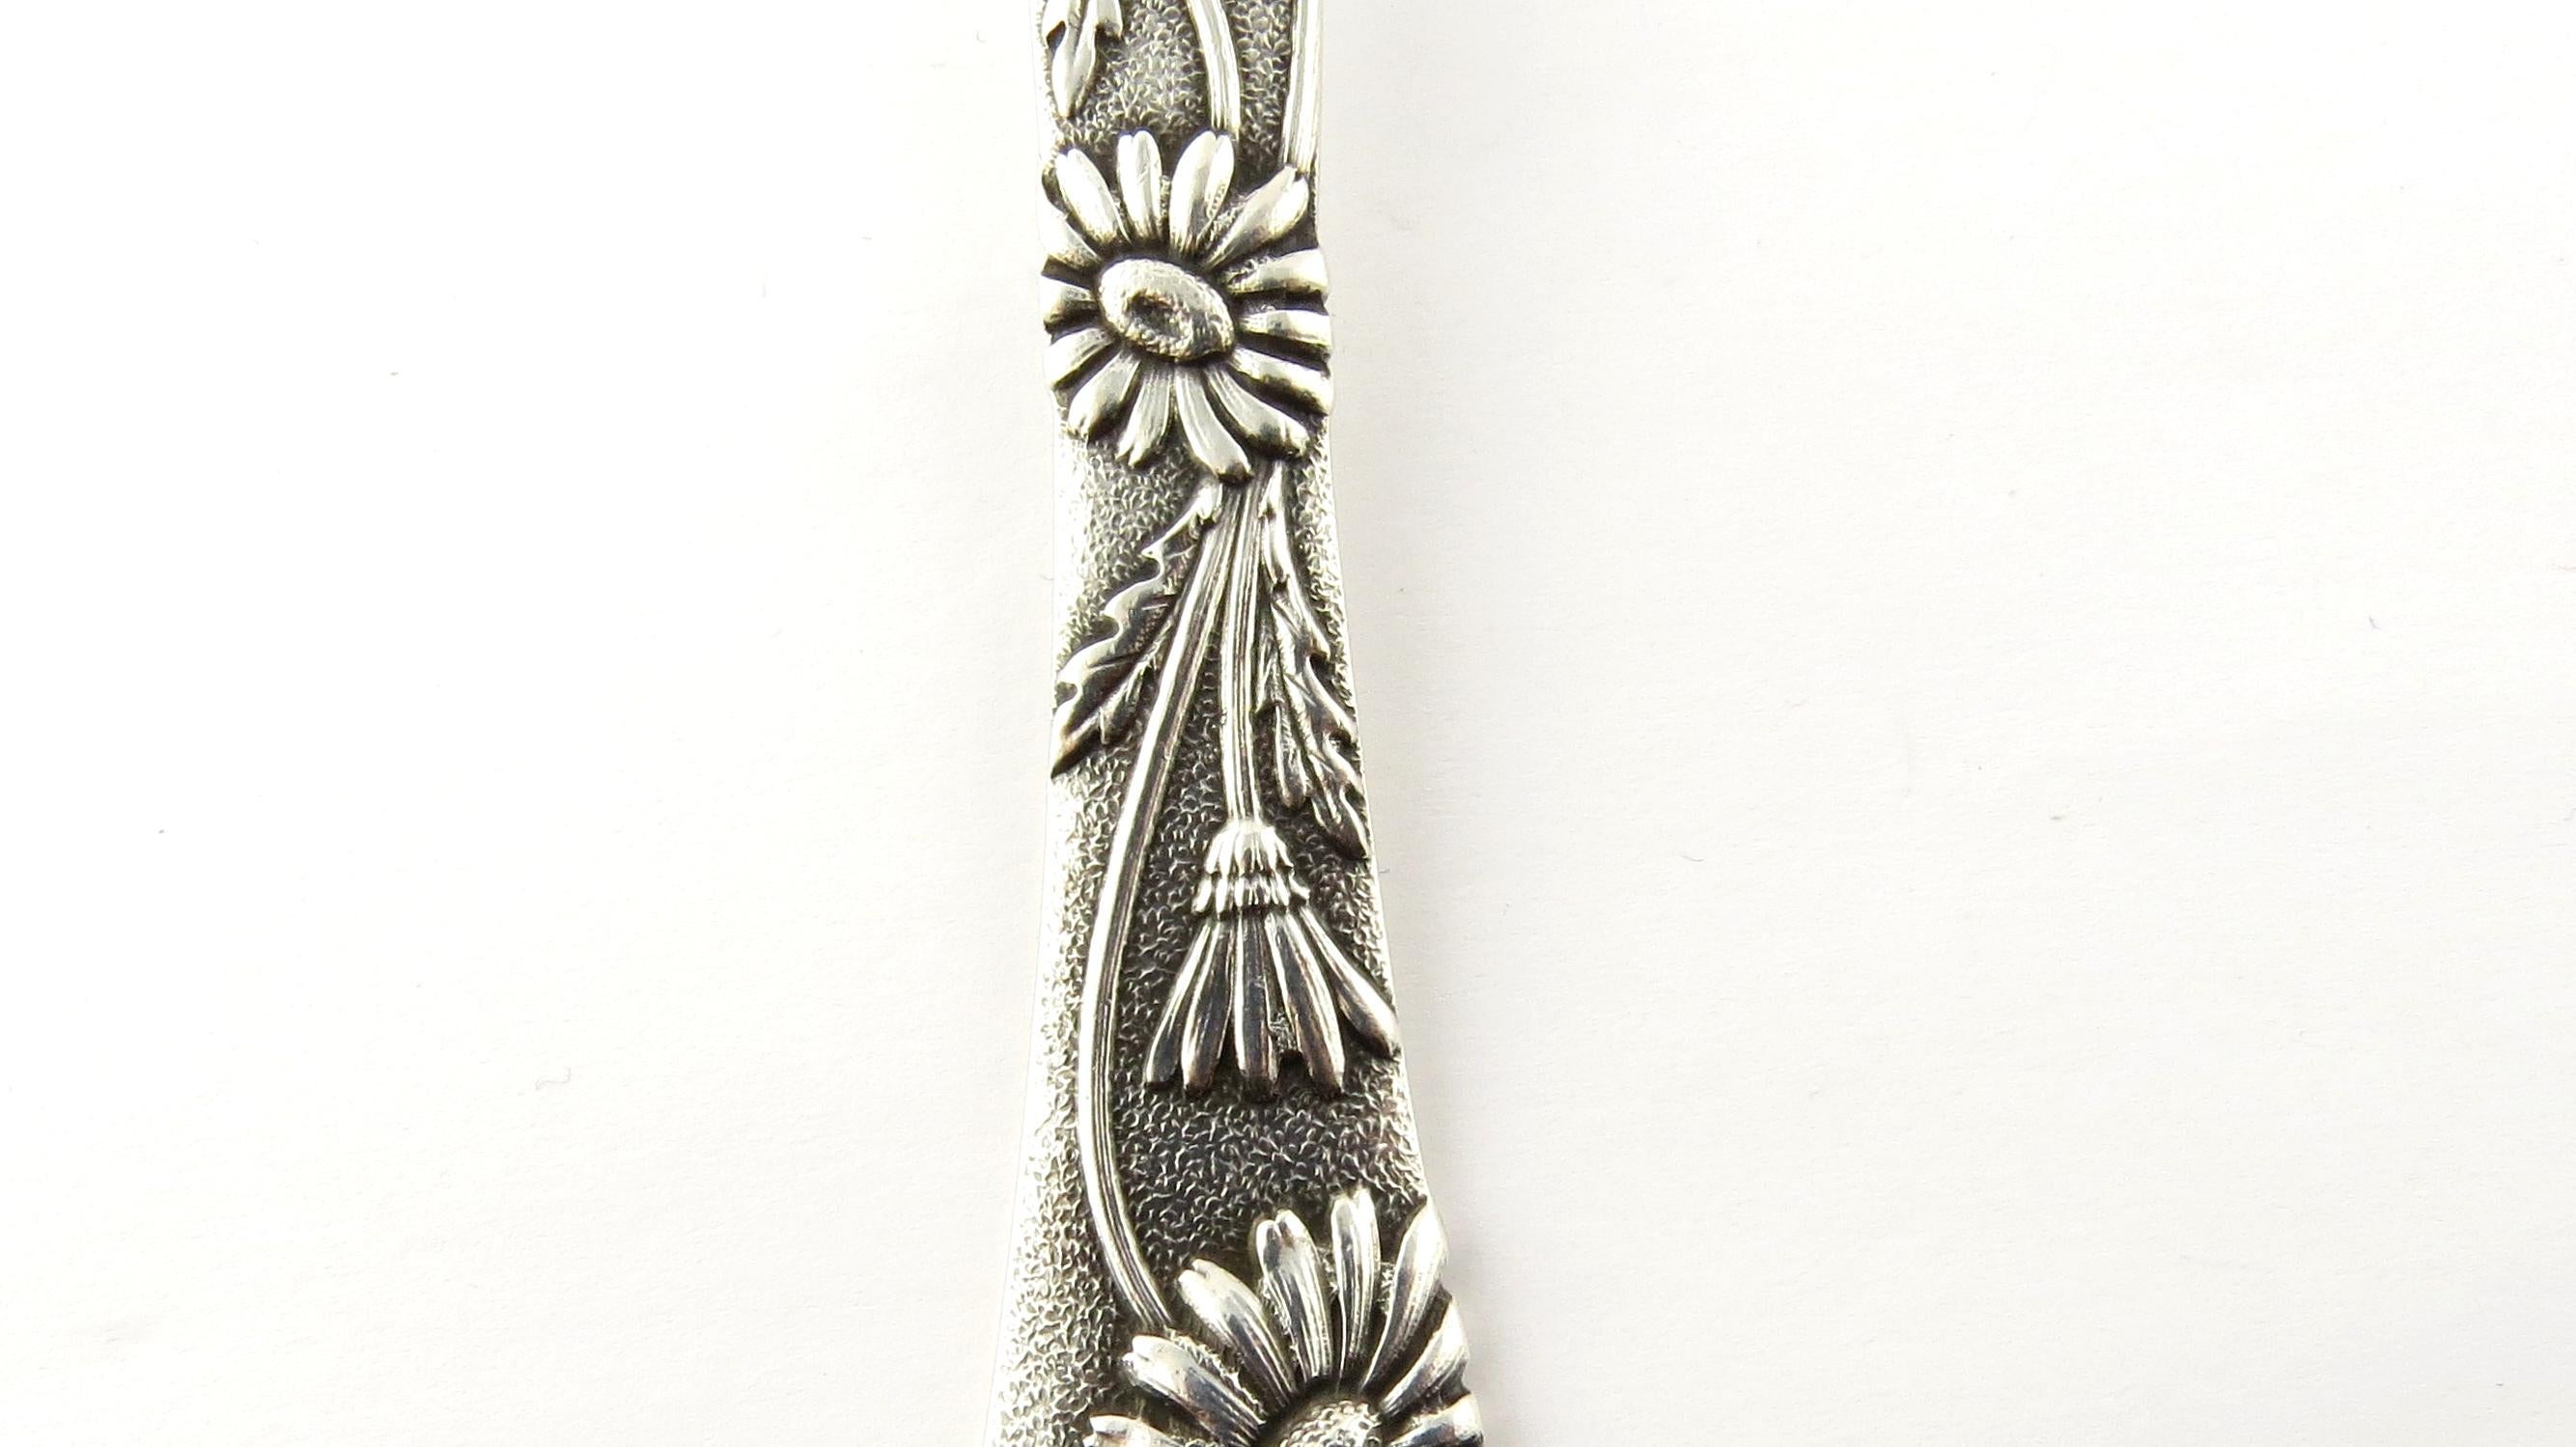 Late 19th Century Tiffany & Co. Sterling Silver 1872 Vine Pattern Tomato Server with Daisies